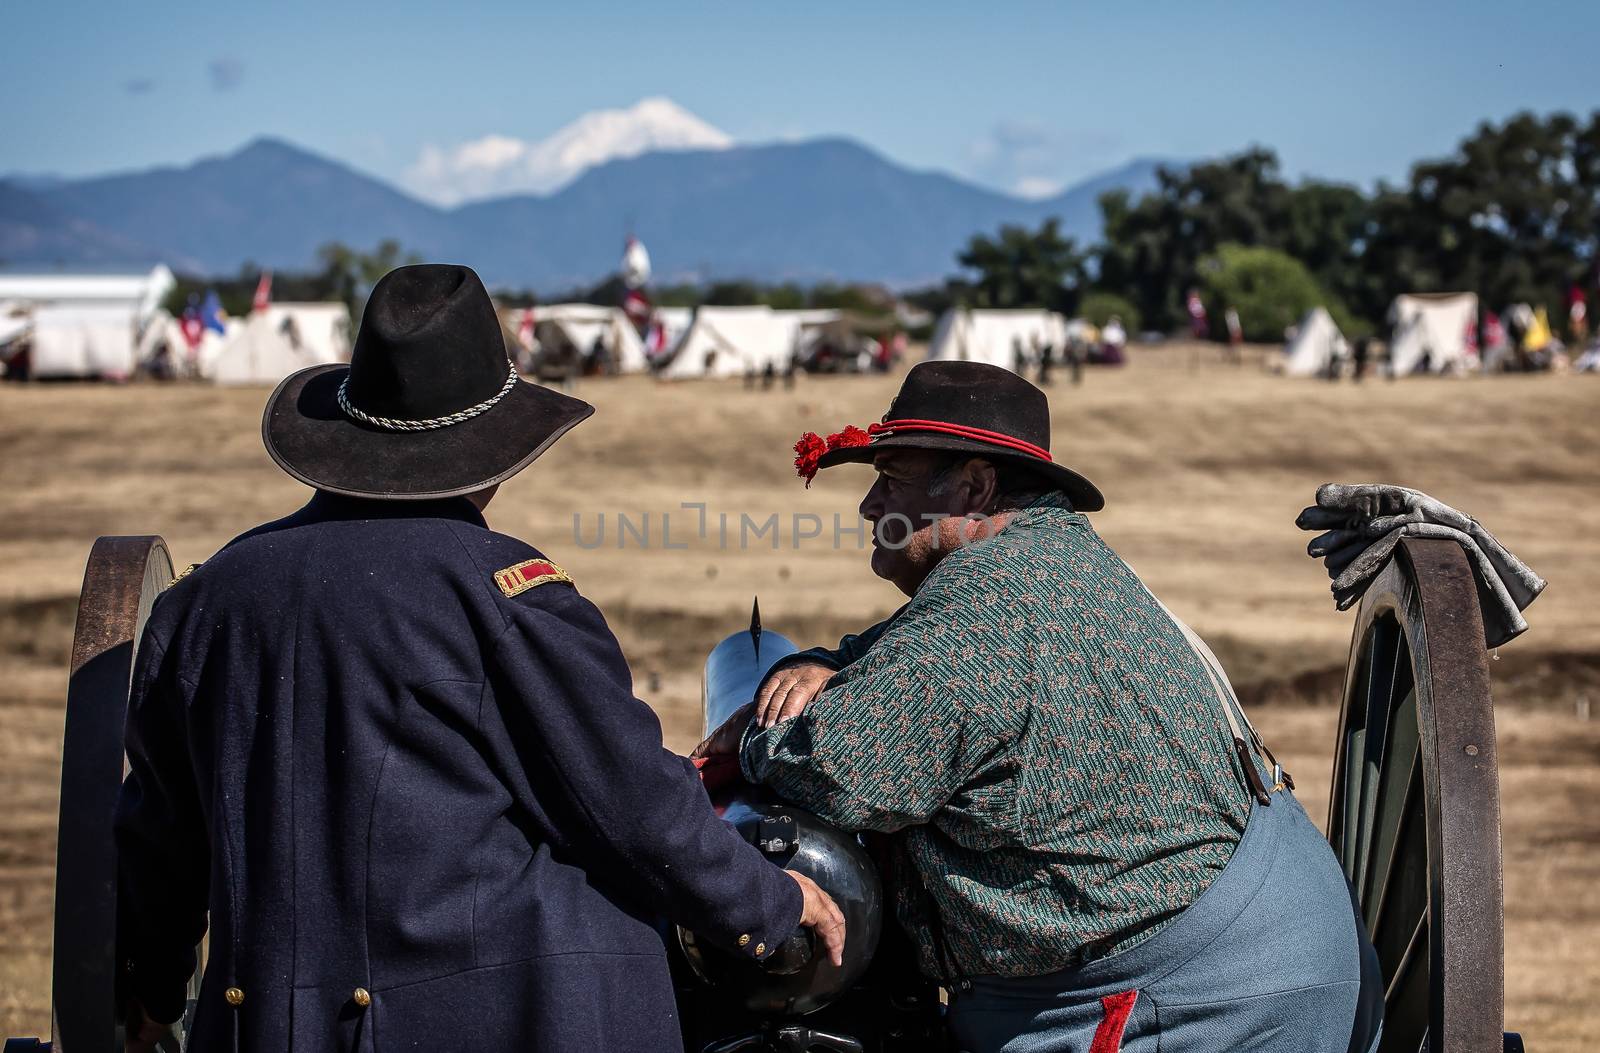 A Union Army cannon crew at a Civil War reenactment in Anderson, California. Mt. Shasta is in the distance.
Photo taken on: September 27th, 2014